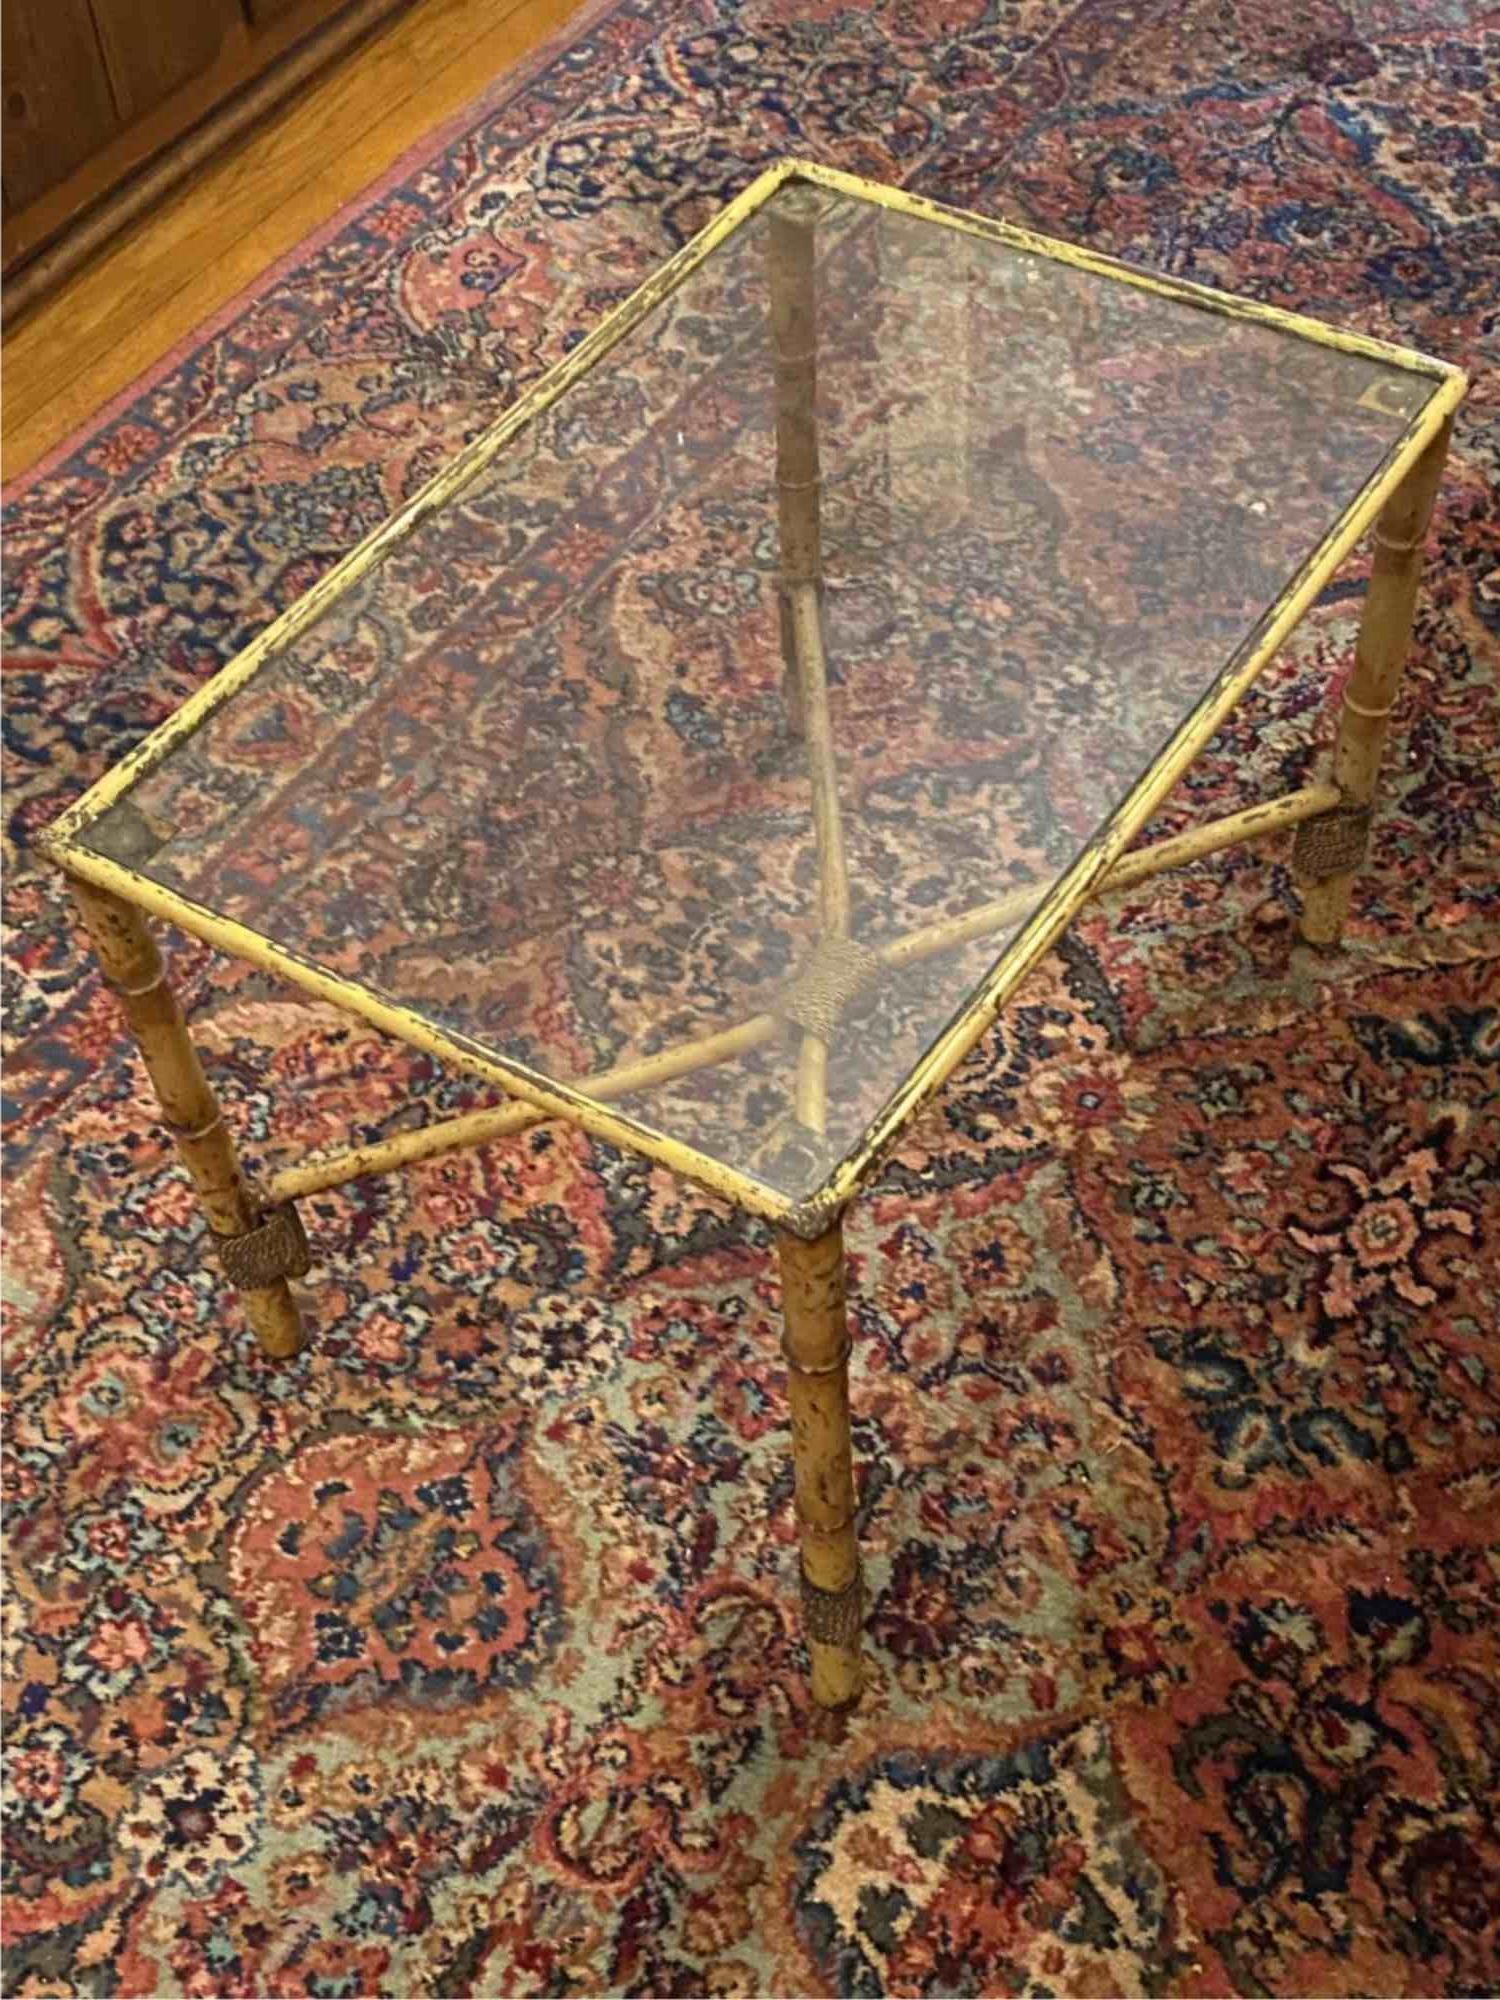 COOL HEAVY METAL FRAME GLASS TOP TABLE